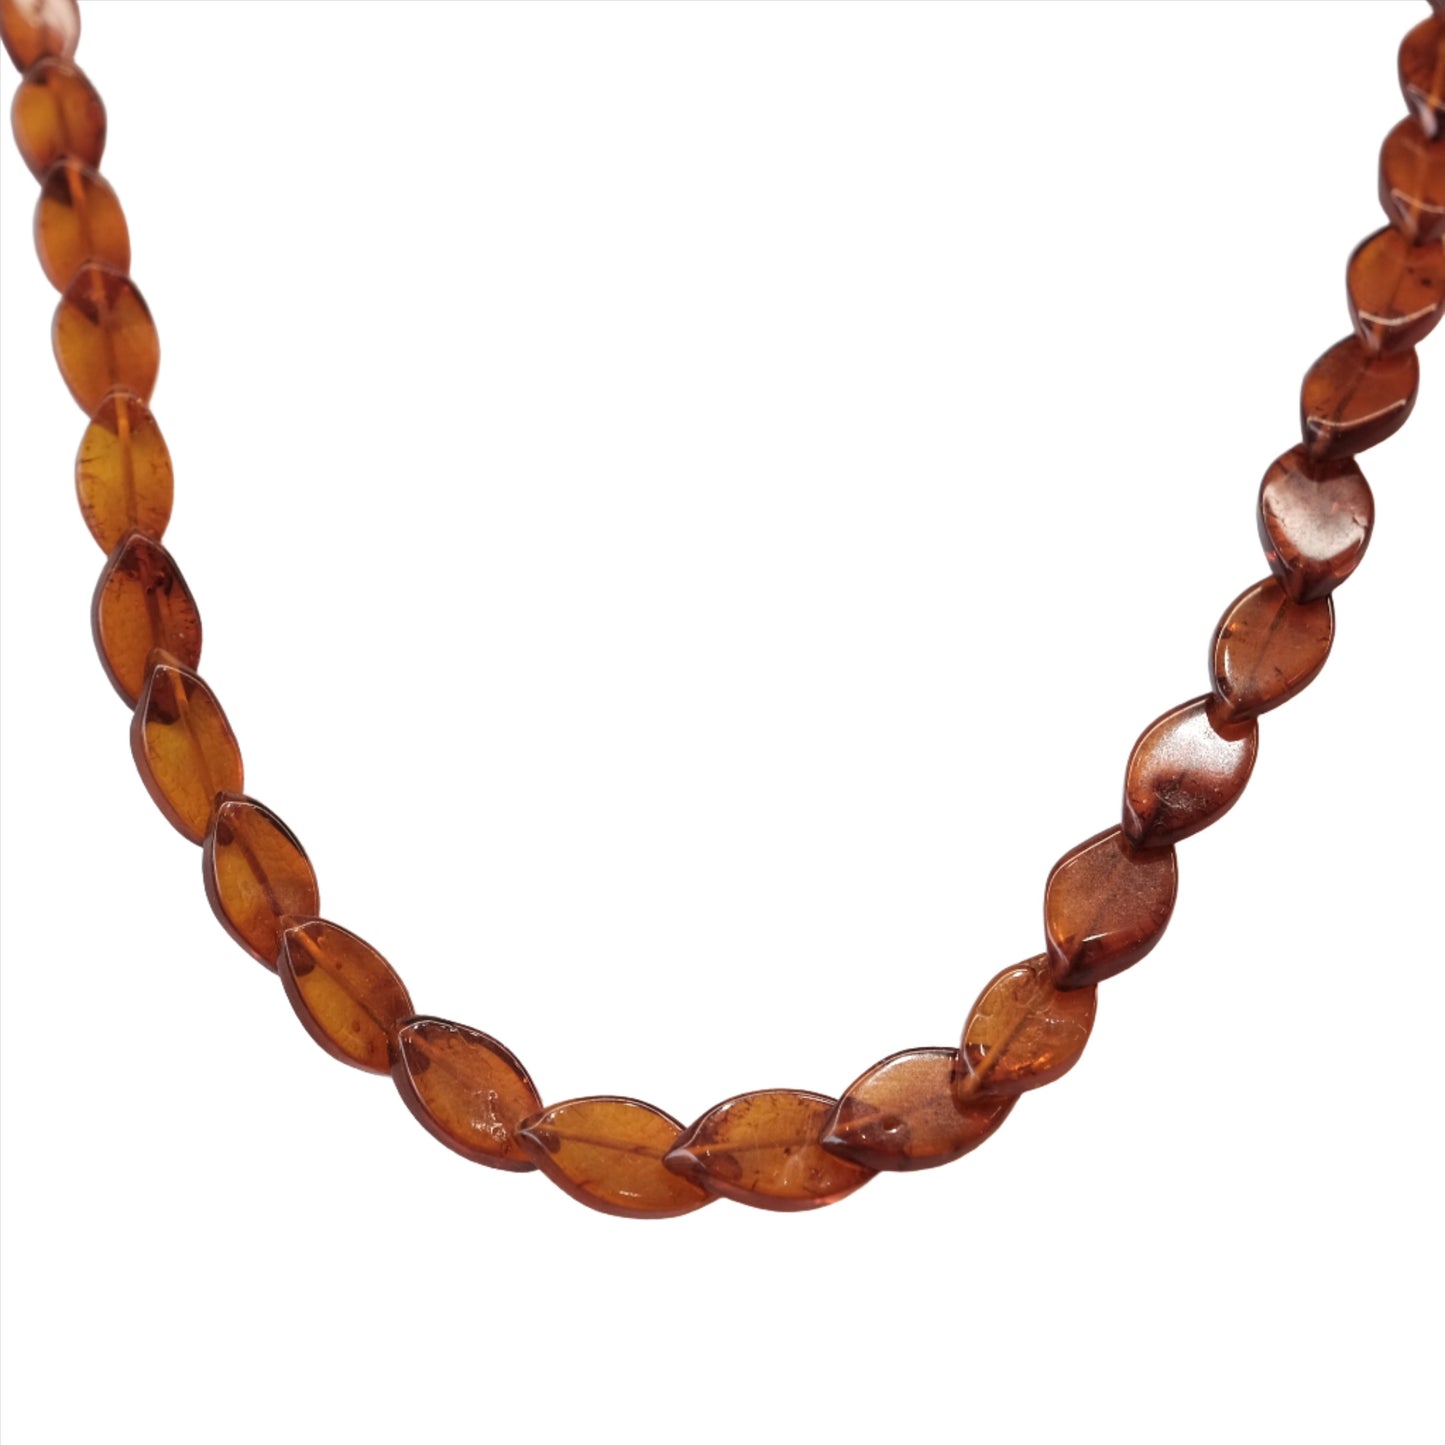 Amber Flat Beads Necklace Adult Size